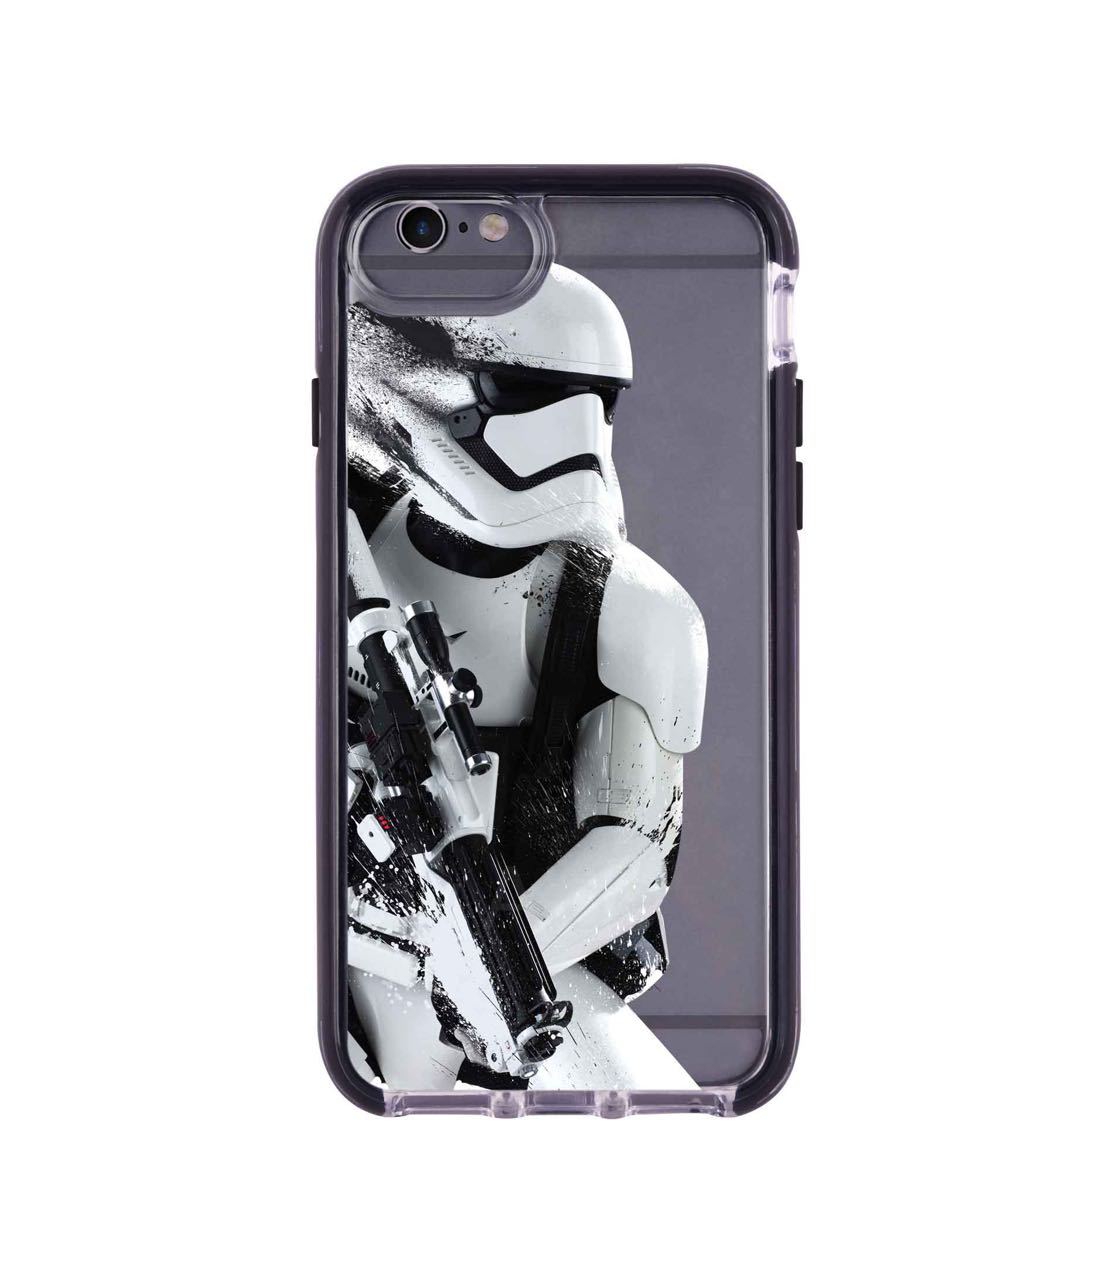 Trooper Storm - Extreme Phone Case for iPhone 6S Plus